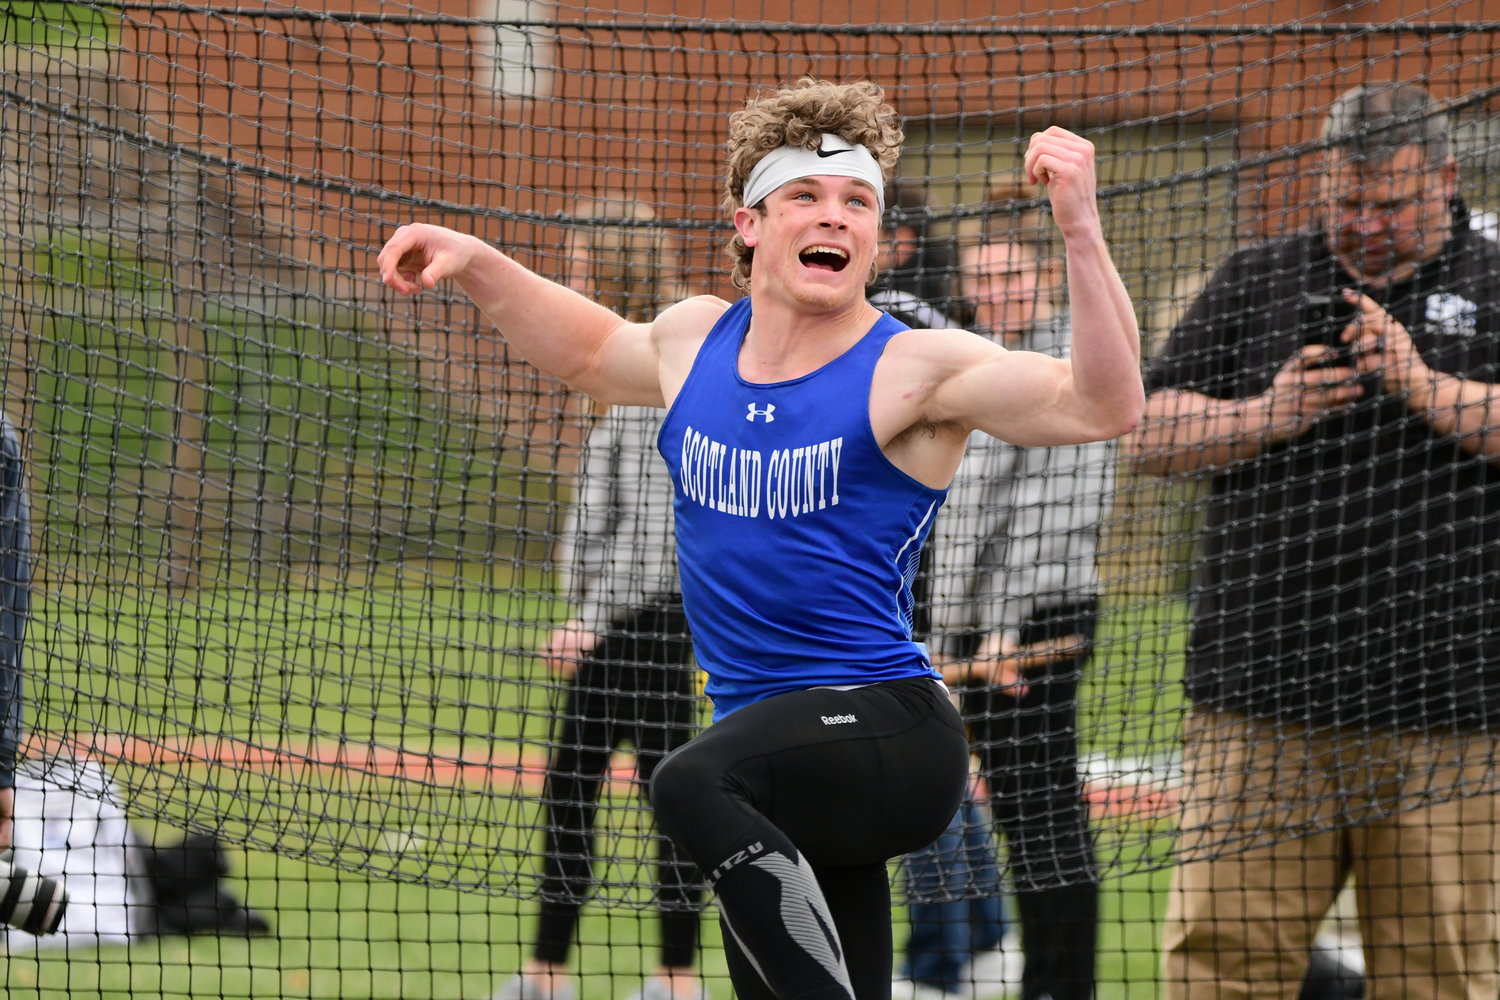 Scotland County's Hayden Long follows through on a discus throw at Tuesday's Truman State High School Invitational. He set a new meet record with a throw of 50.02 meters.